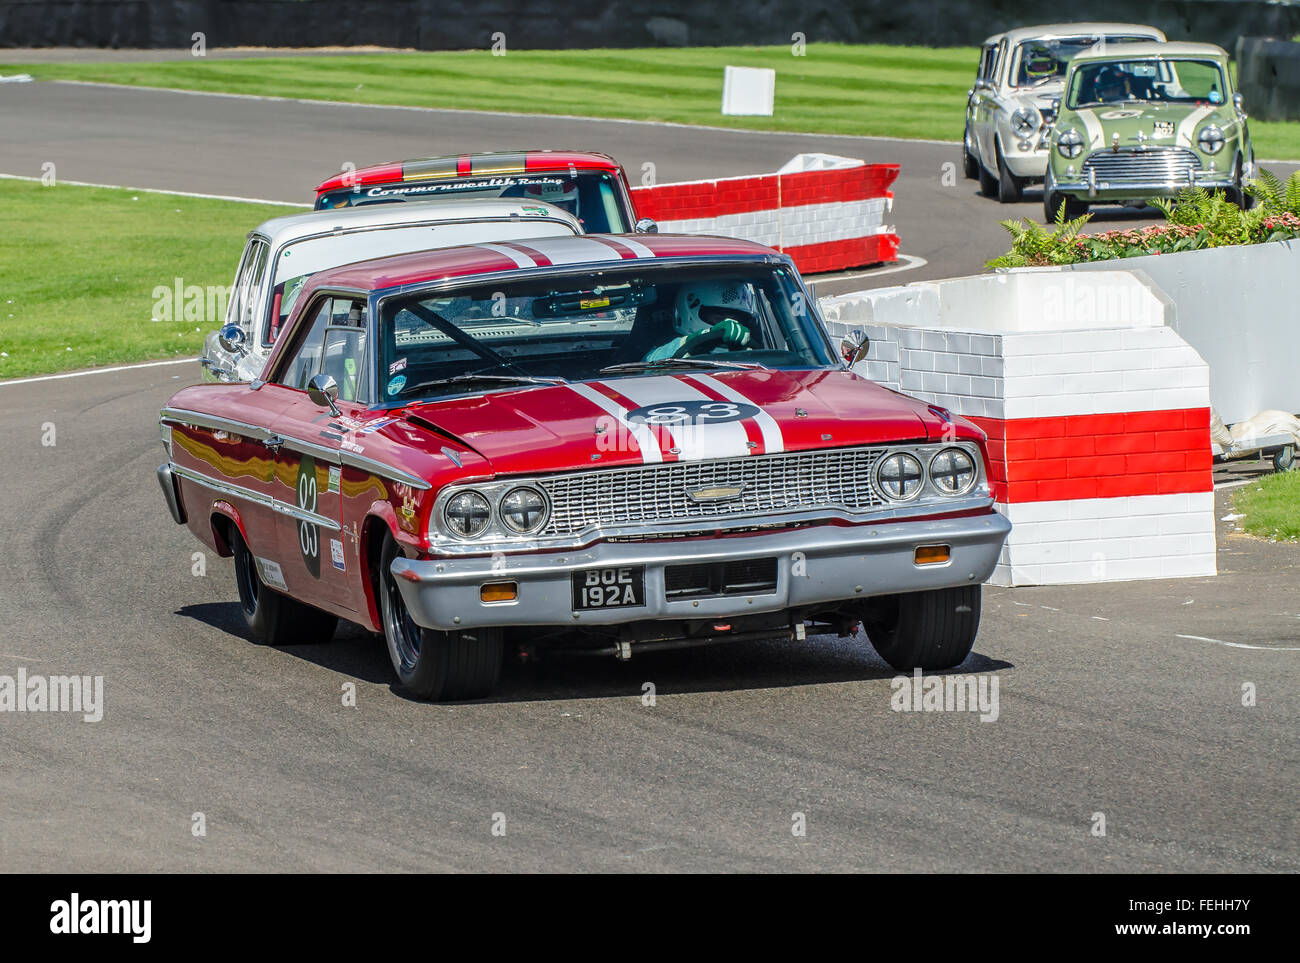 1963 Ford Galaxie is seen racing at the 2015 Goodwood Revival Stock Photo